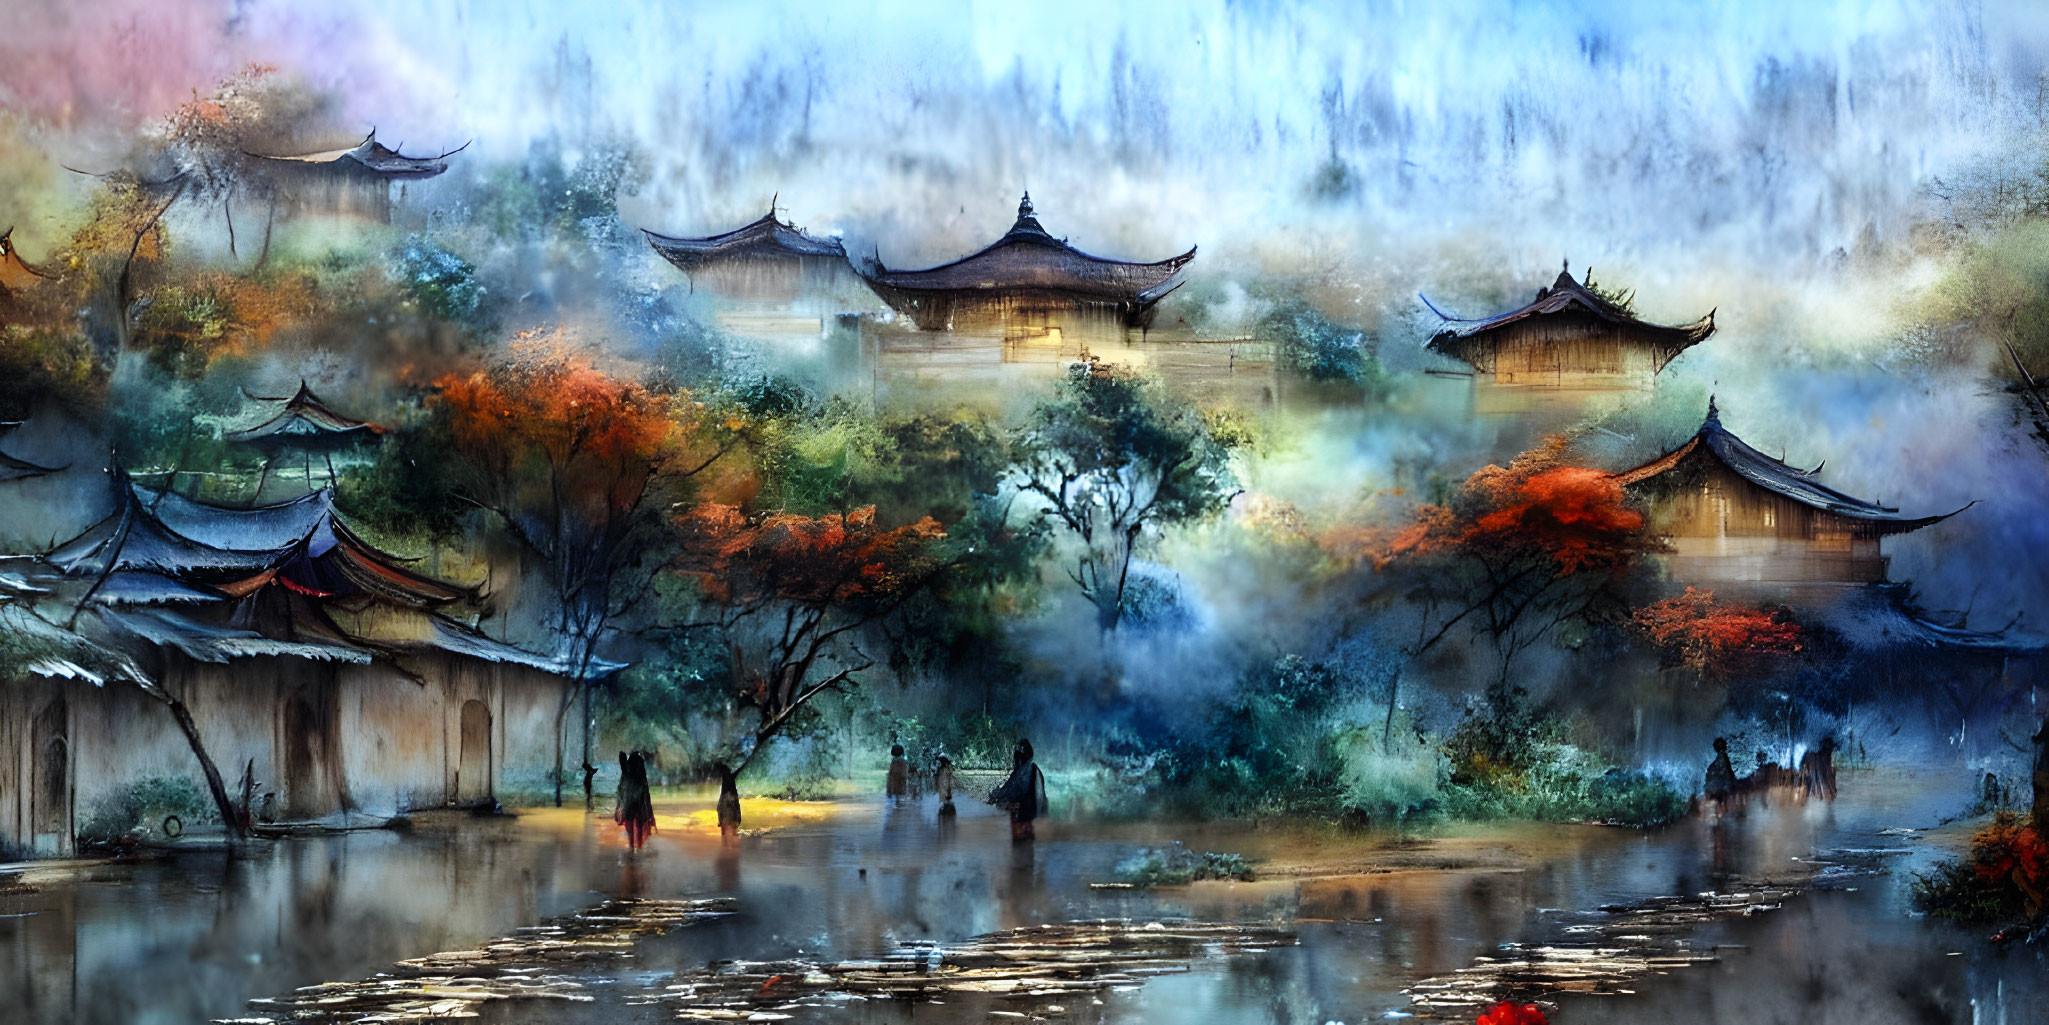 Ancient Asian village with misty ambiance and autumn scenery